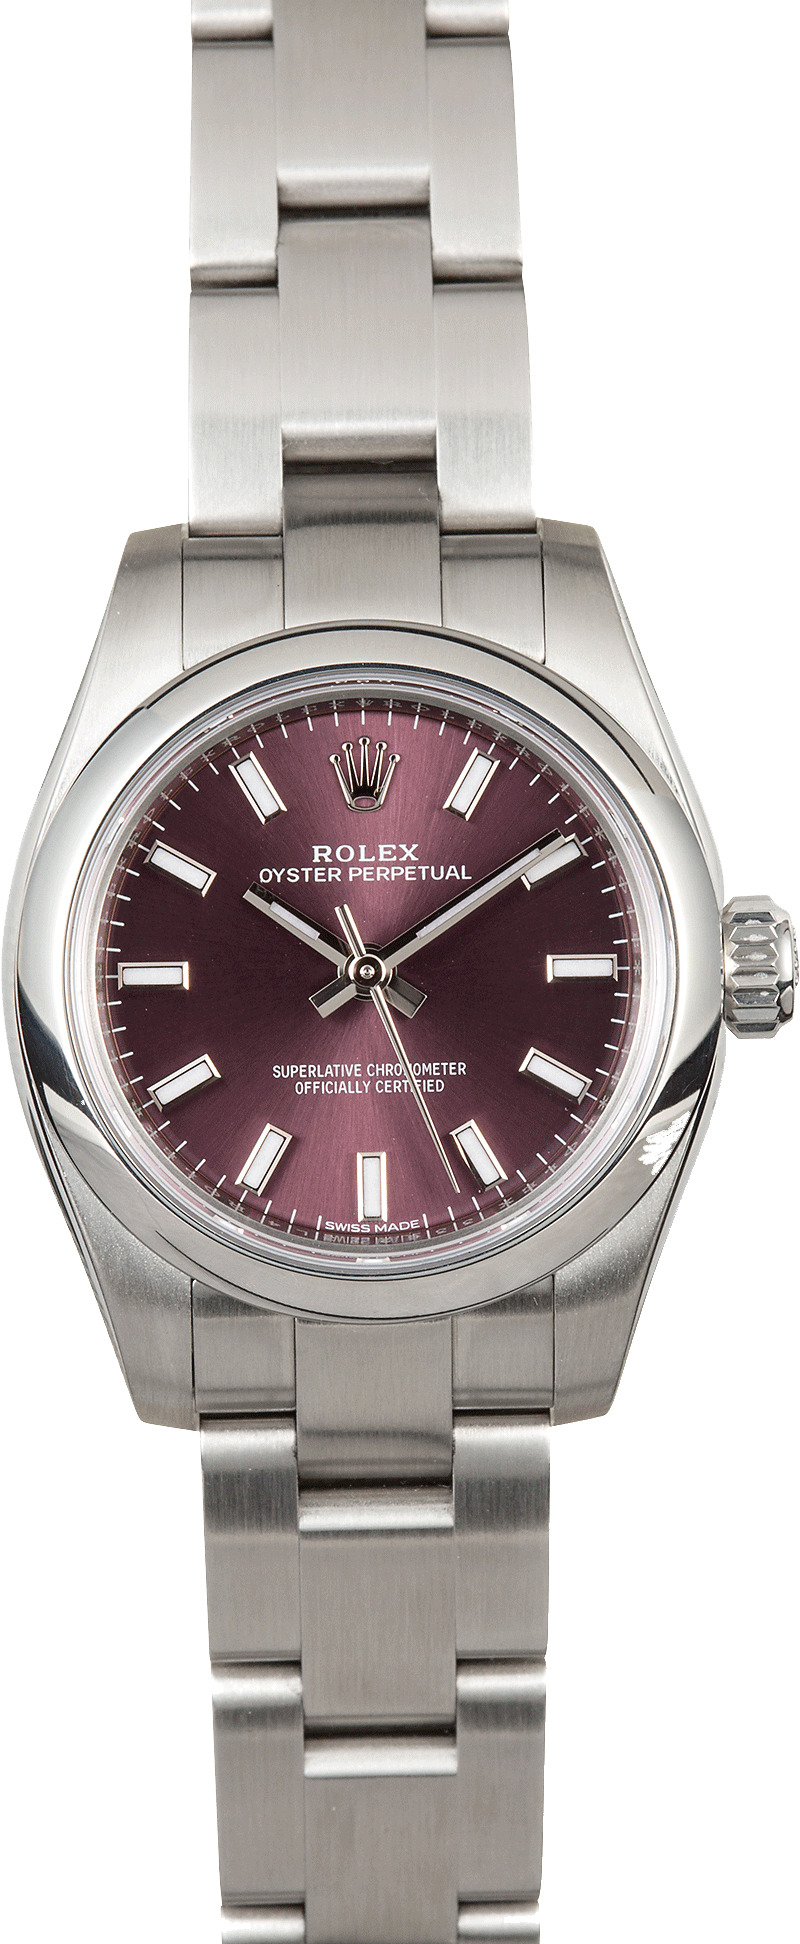 1991 rolex oyster perpetual datejust